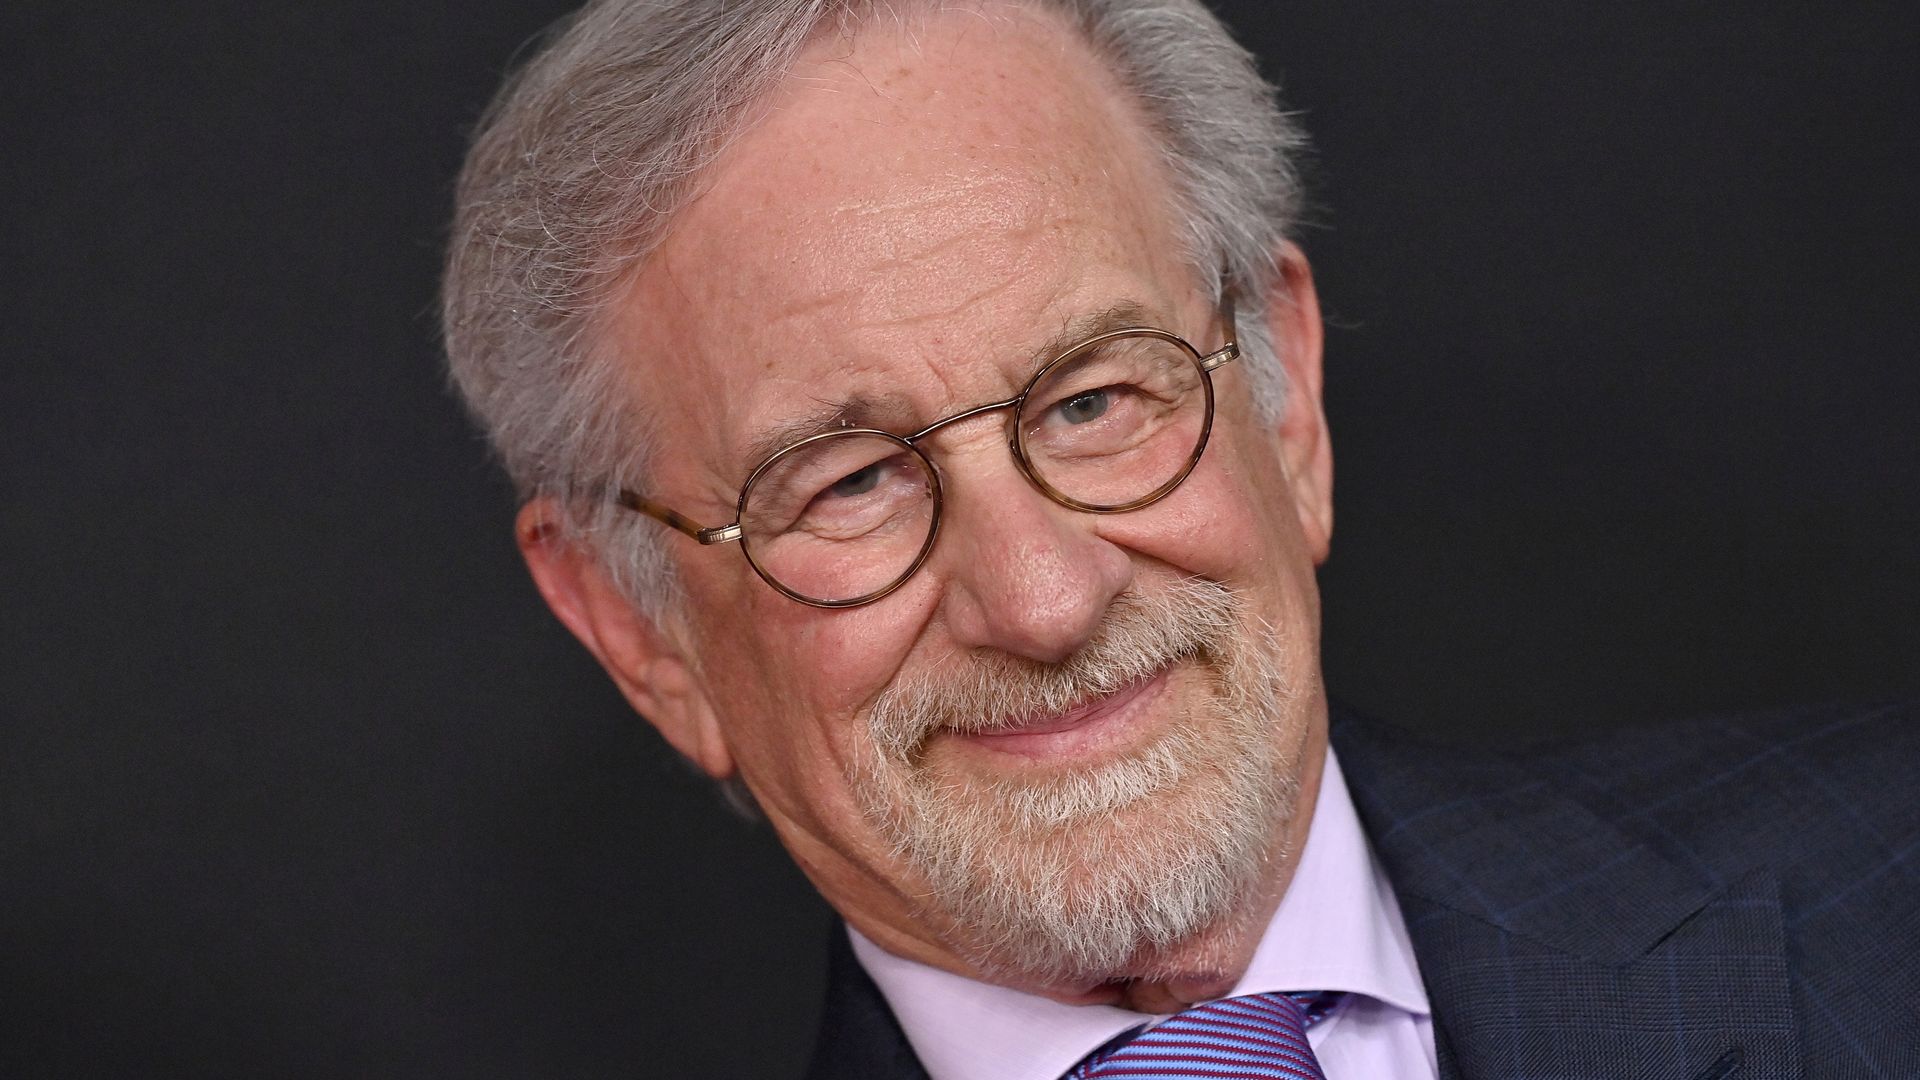 Steven Spielberg smiling at an event photo call